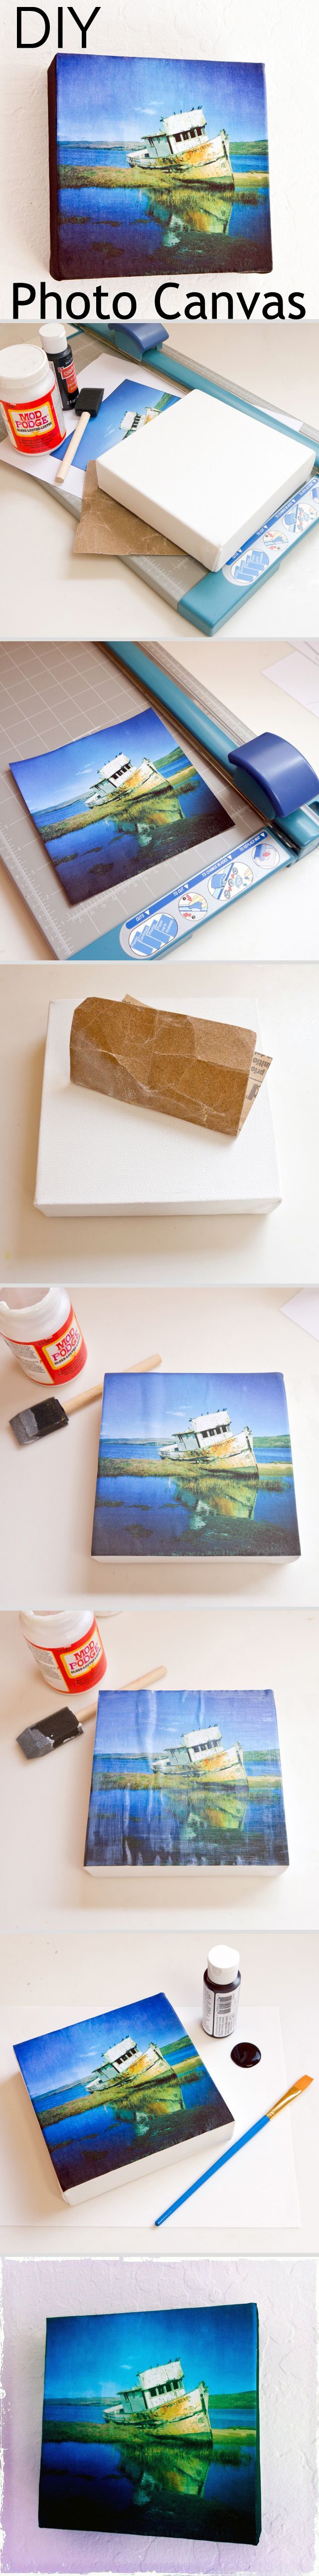 Make your own photo canvas prints to save money.  #instagram photos are great fo